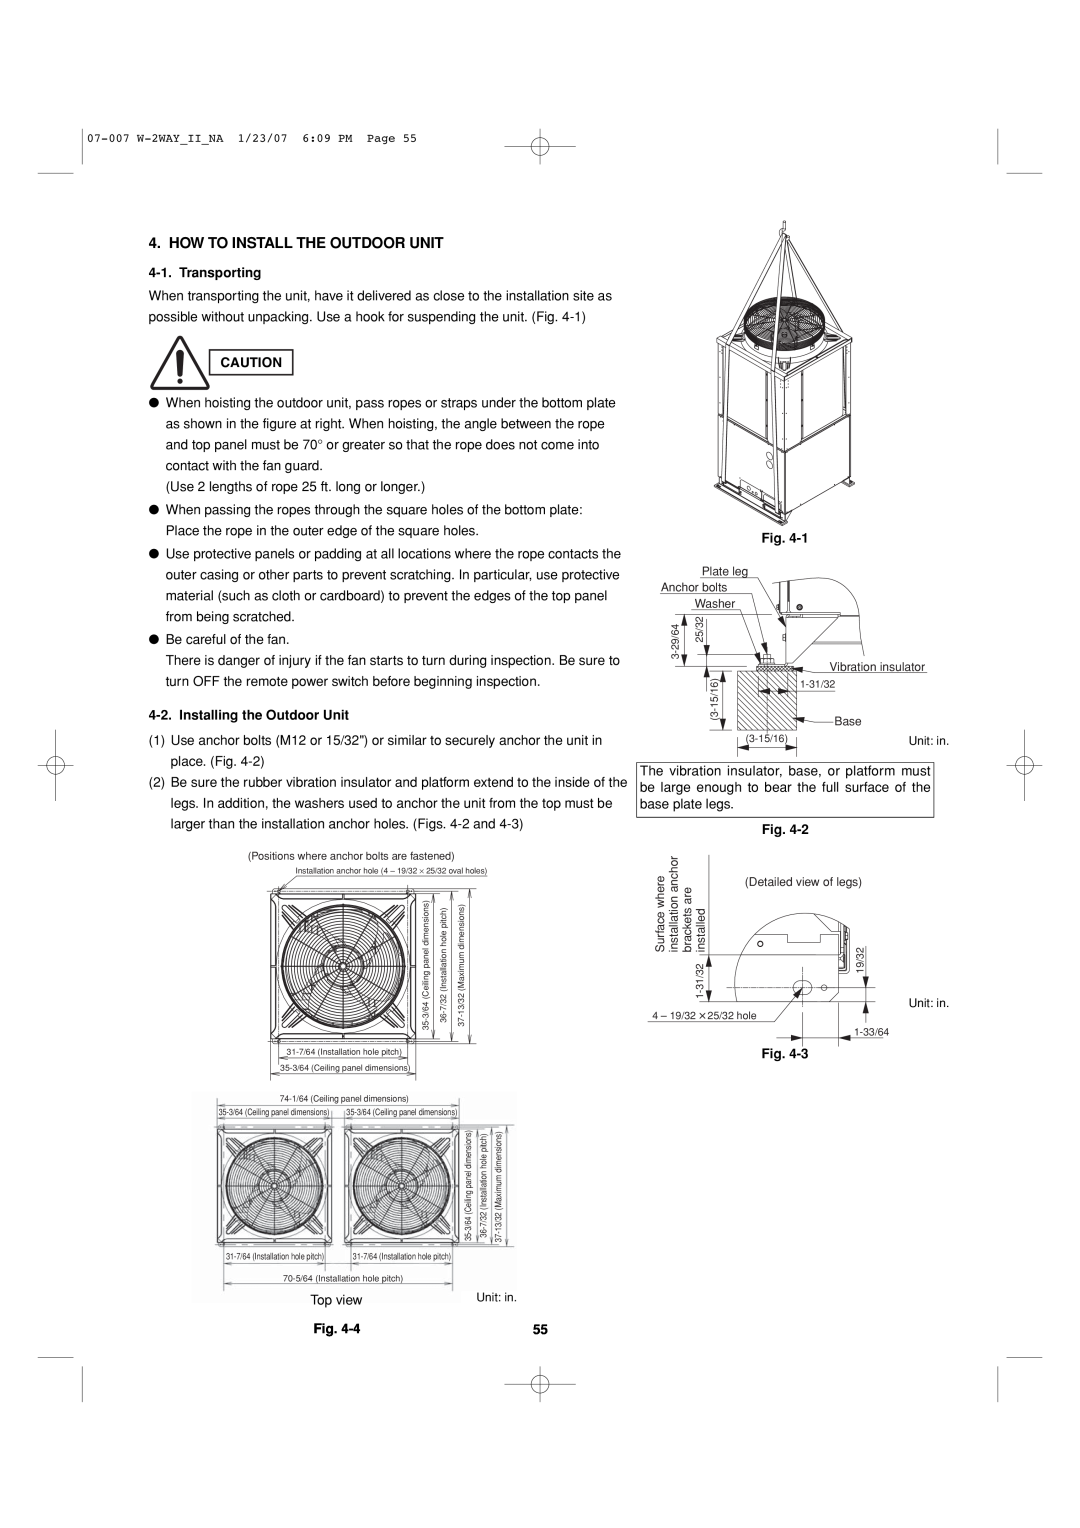 Sanyo 85464359982001 How To Install The Outdoor Unit, Transporting, Installing the Outdoor Unit, Fig 